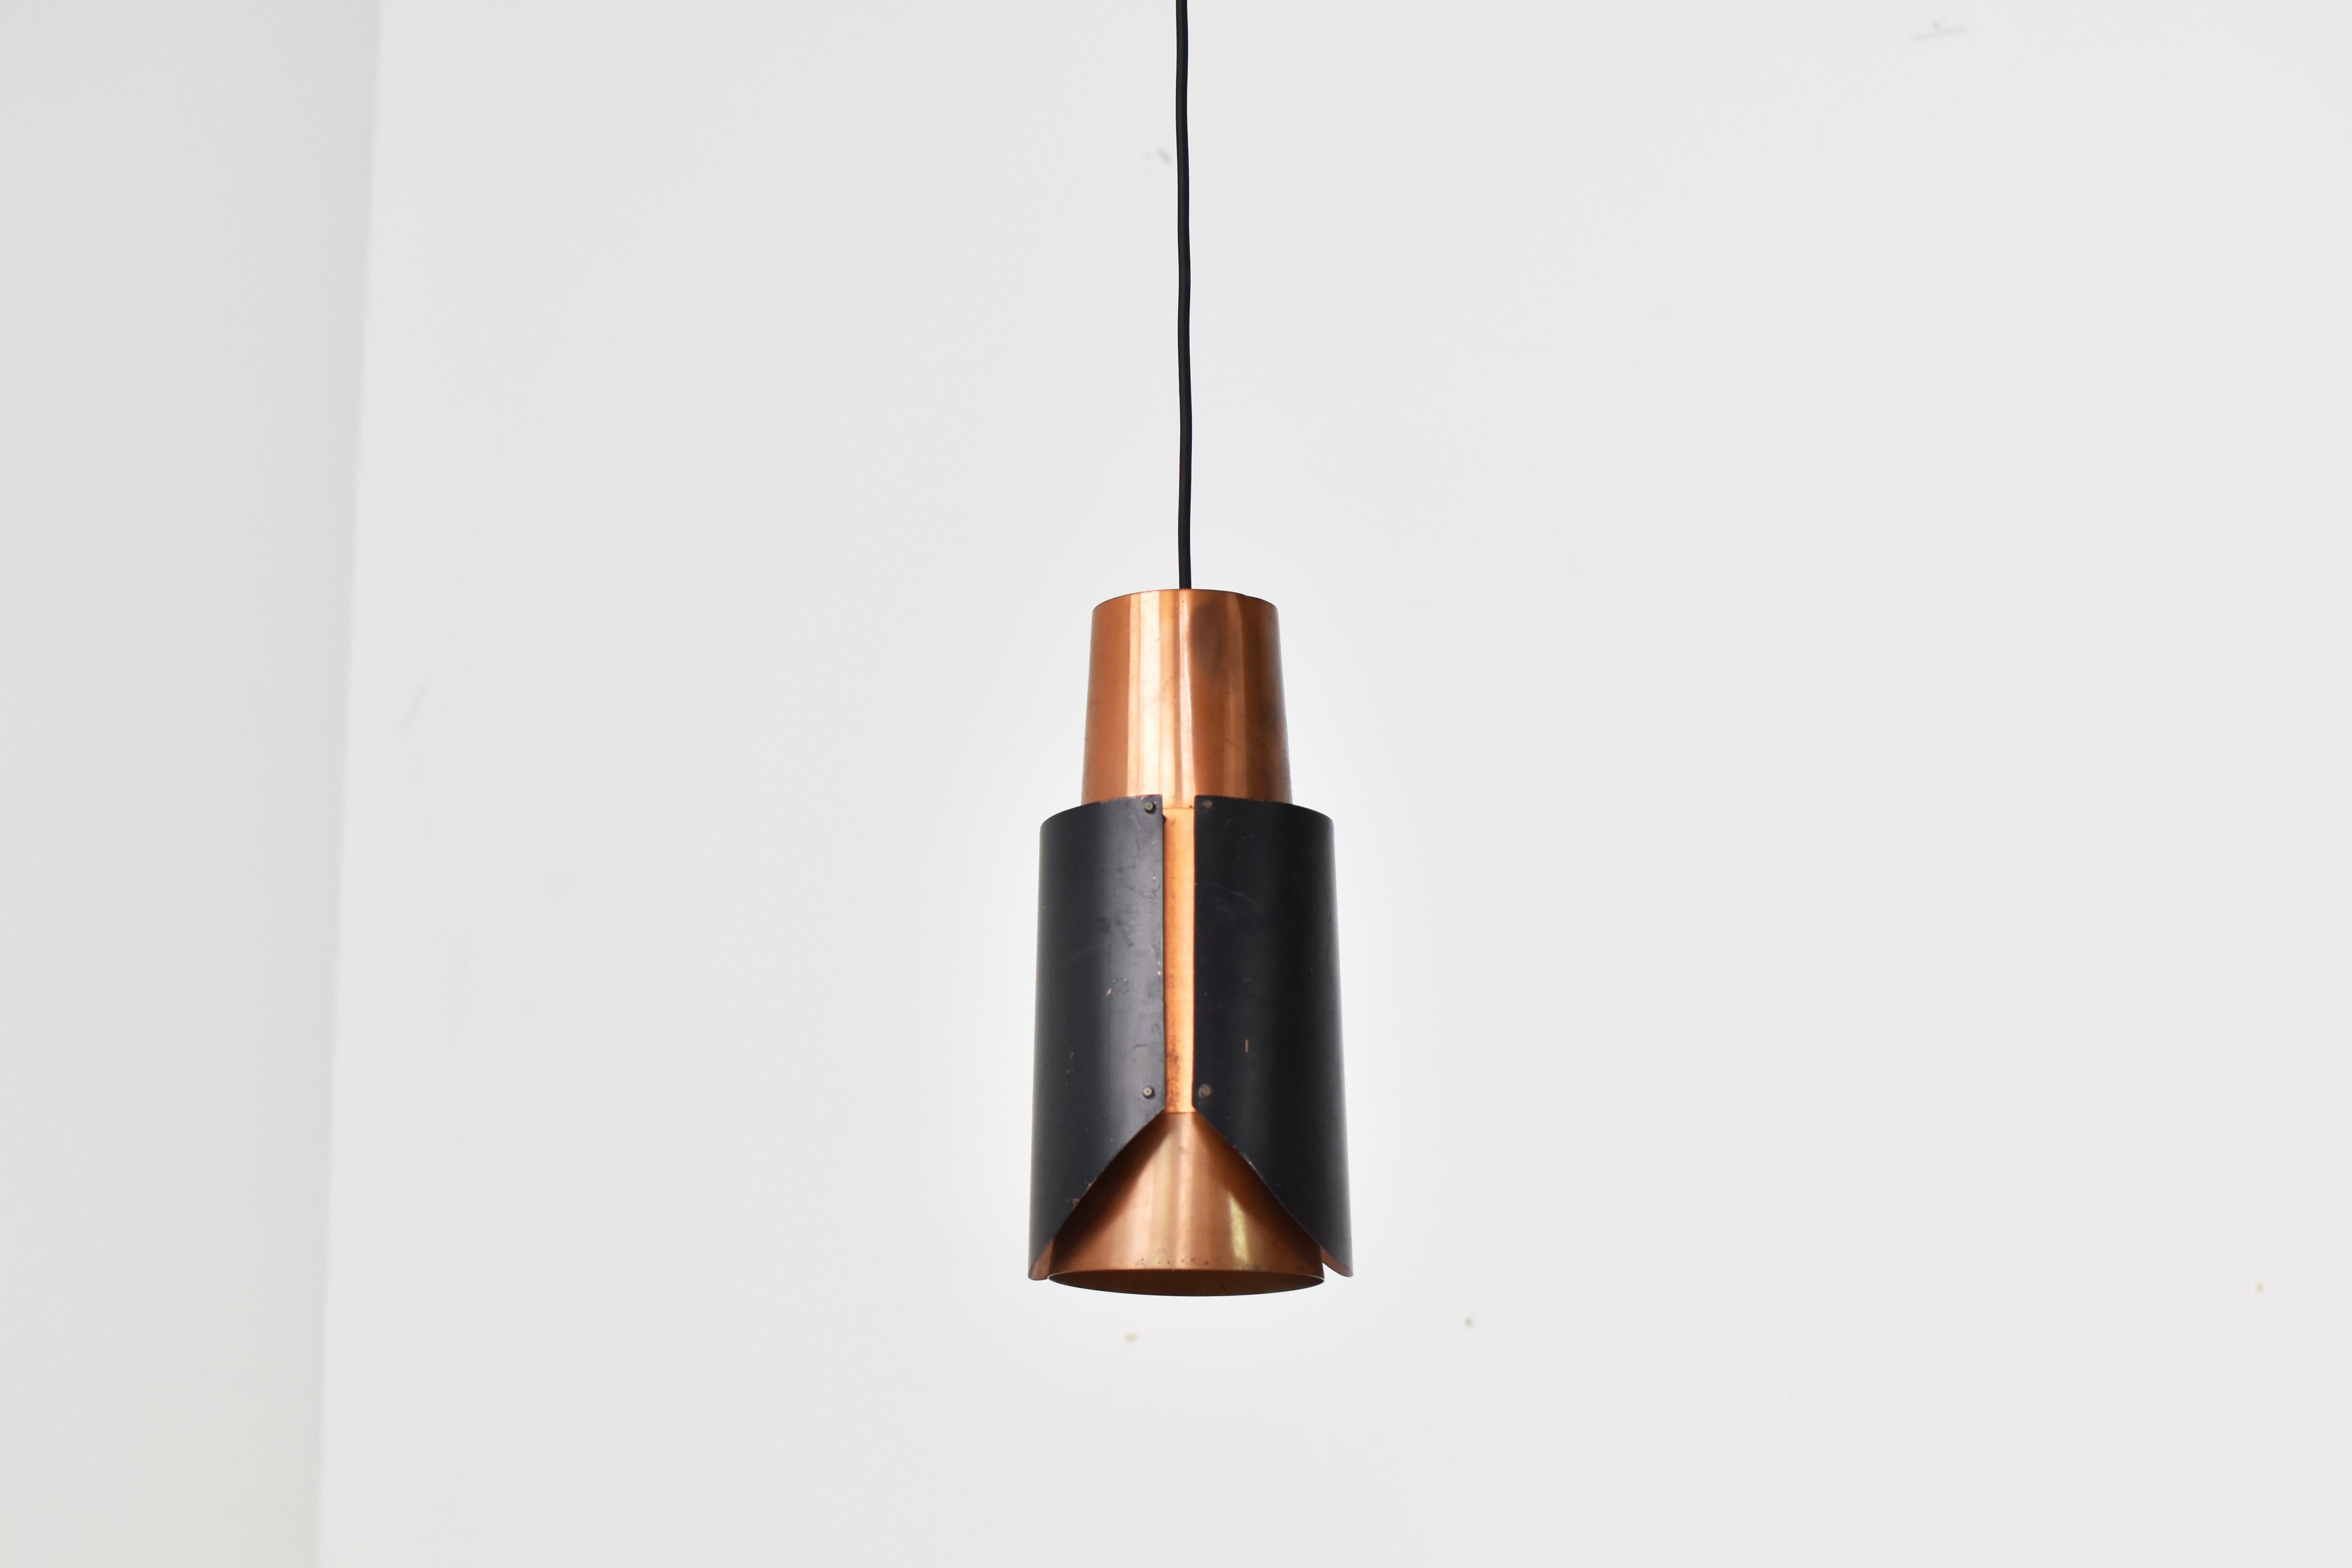 ‘Østerport’ pendant by Bent Karlby for Lyfa, Denmark 1960’s. This lamp is made out of thin copper and black lacquered metal. Good original condition with some visible wear from age and use. Newly rewired.